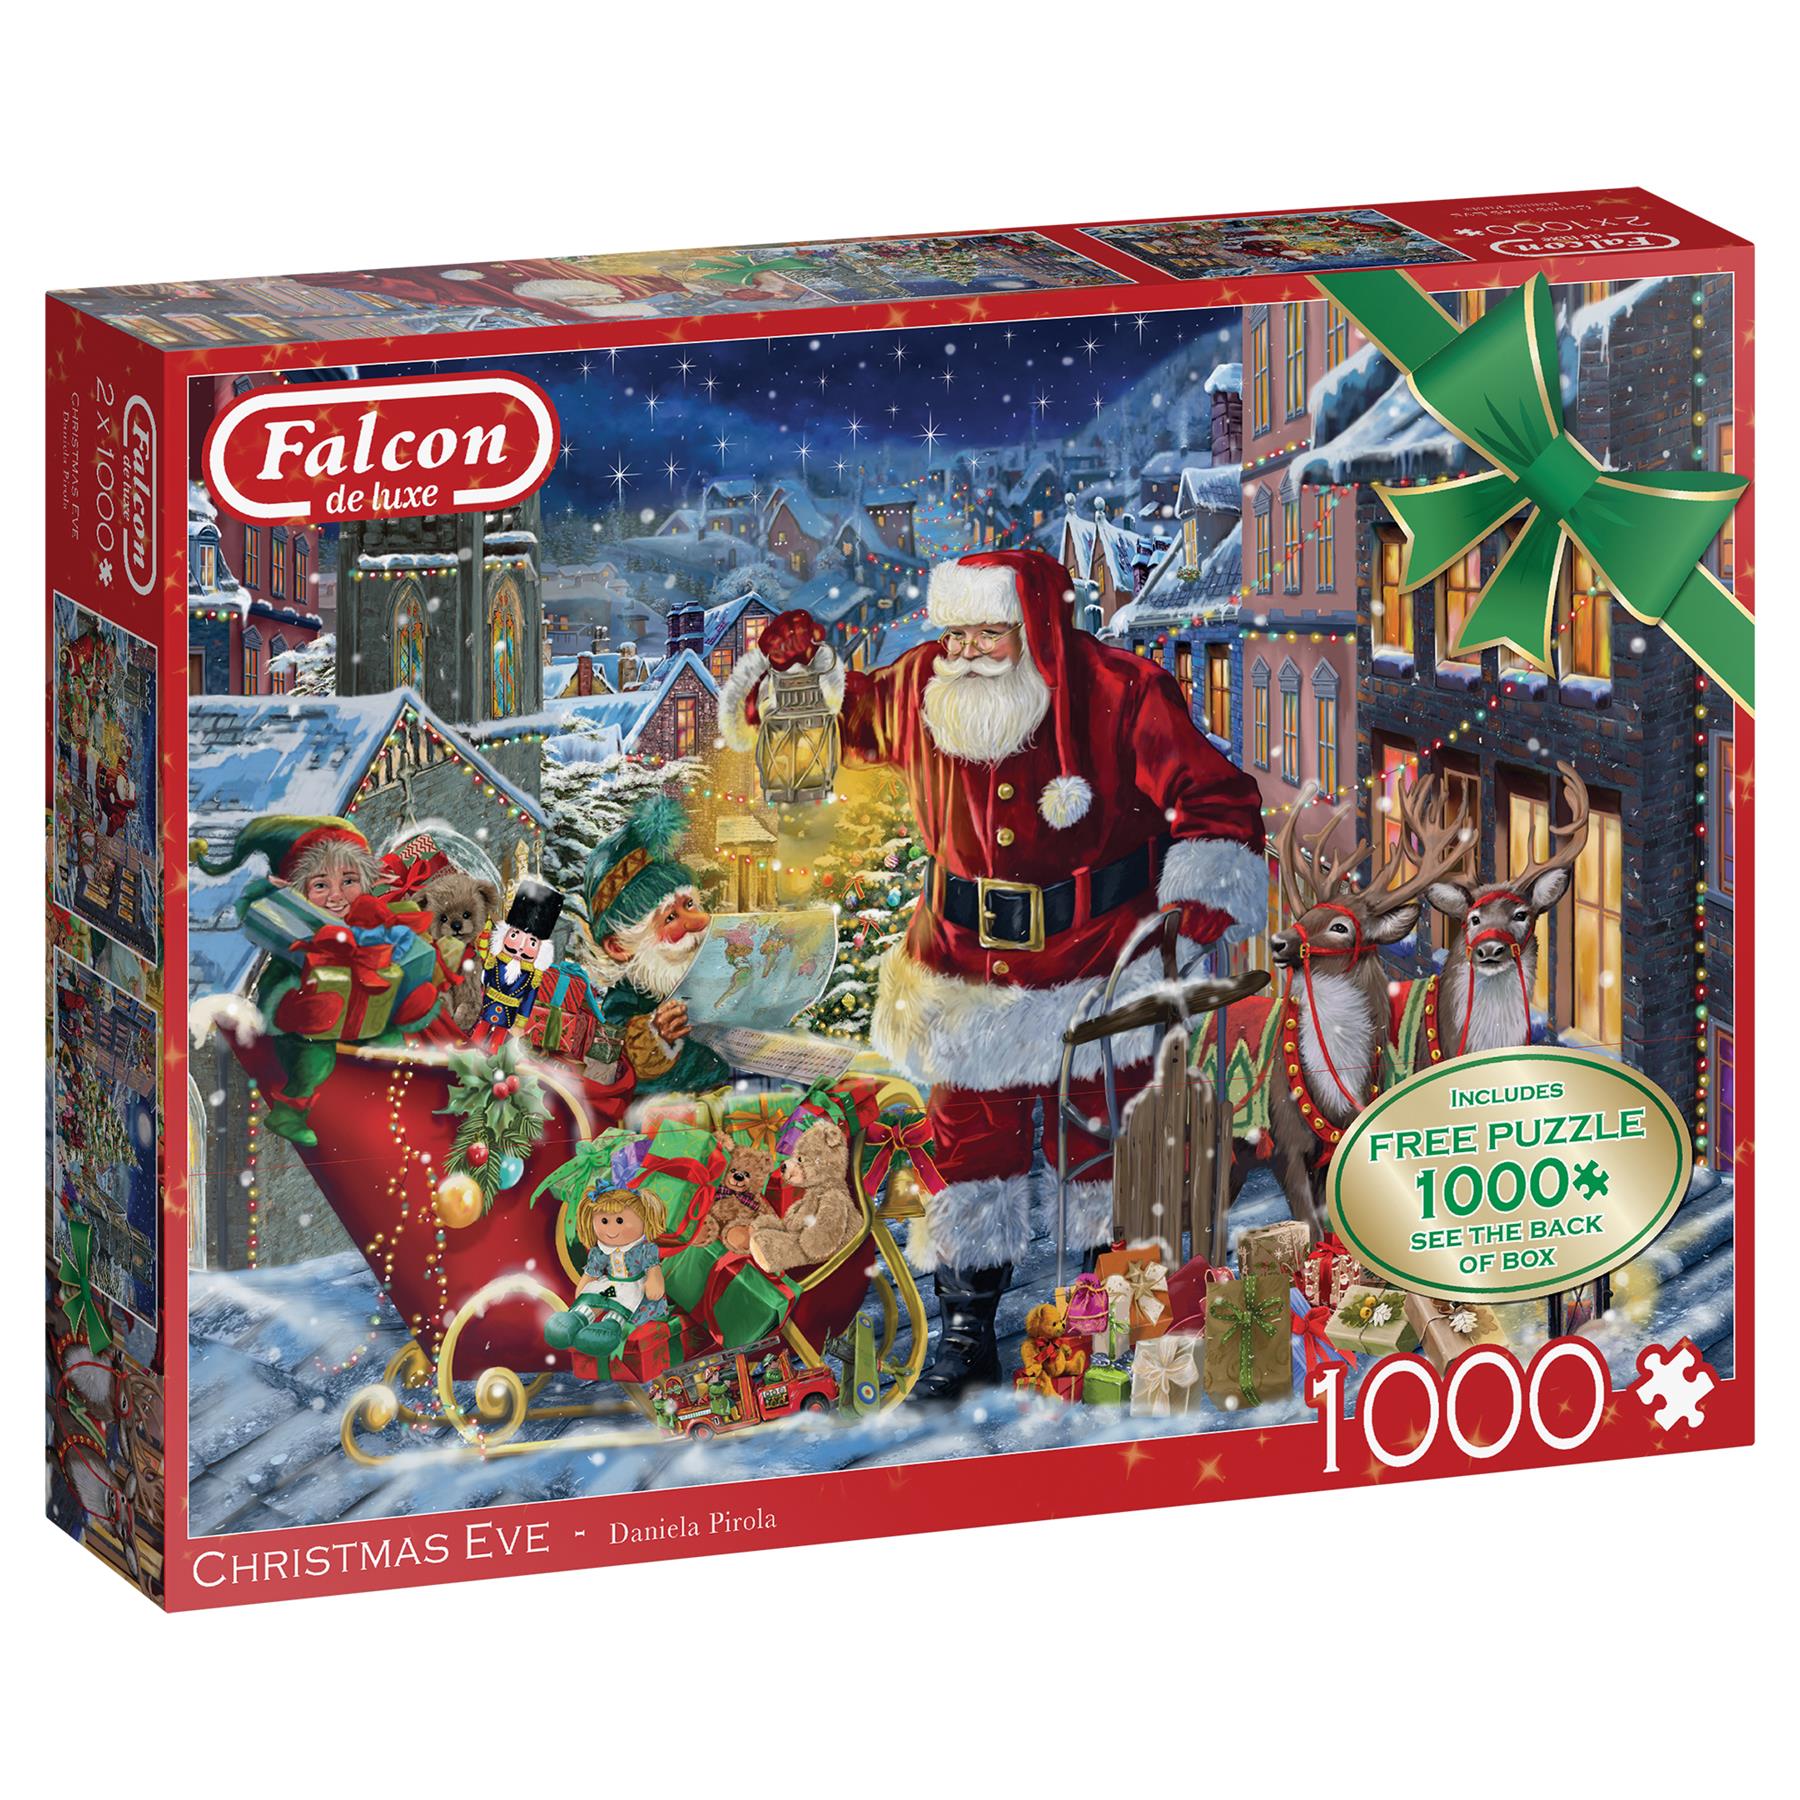 Falcon de Luxe Christmas Eve 2 x 1000 Piece Jigsaw Puzzles - Limited Edition